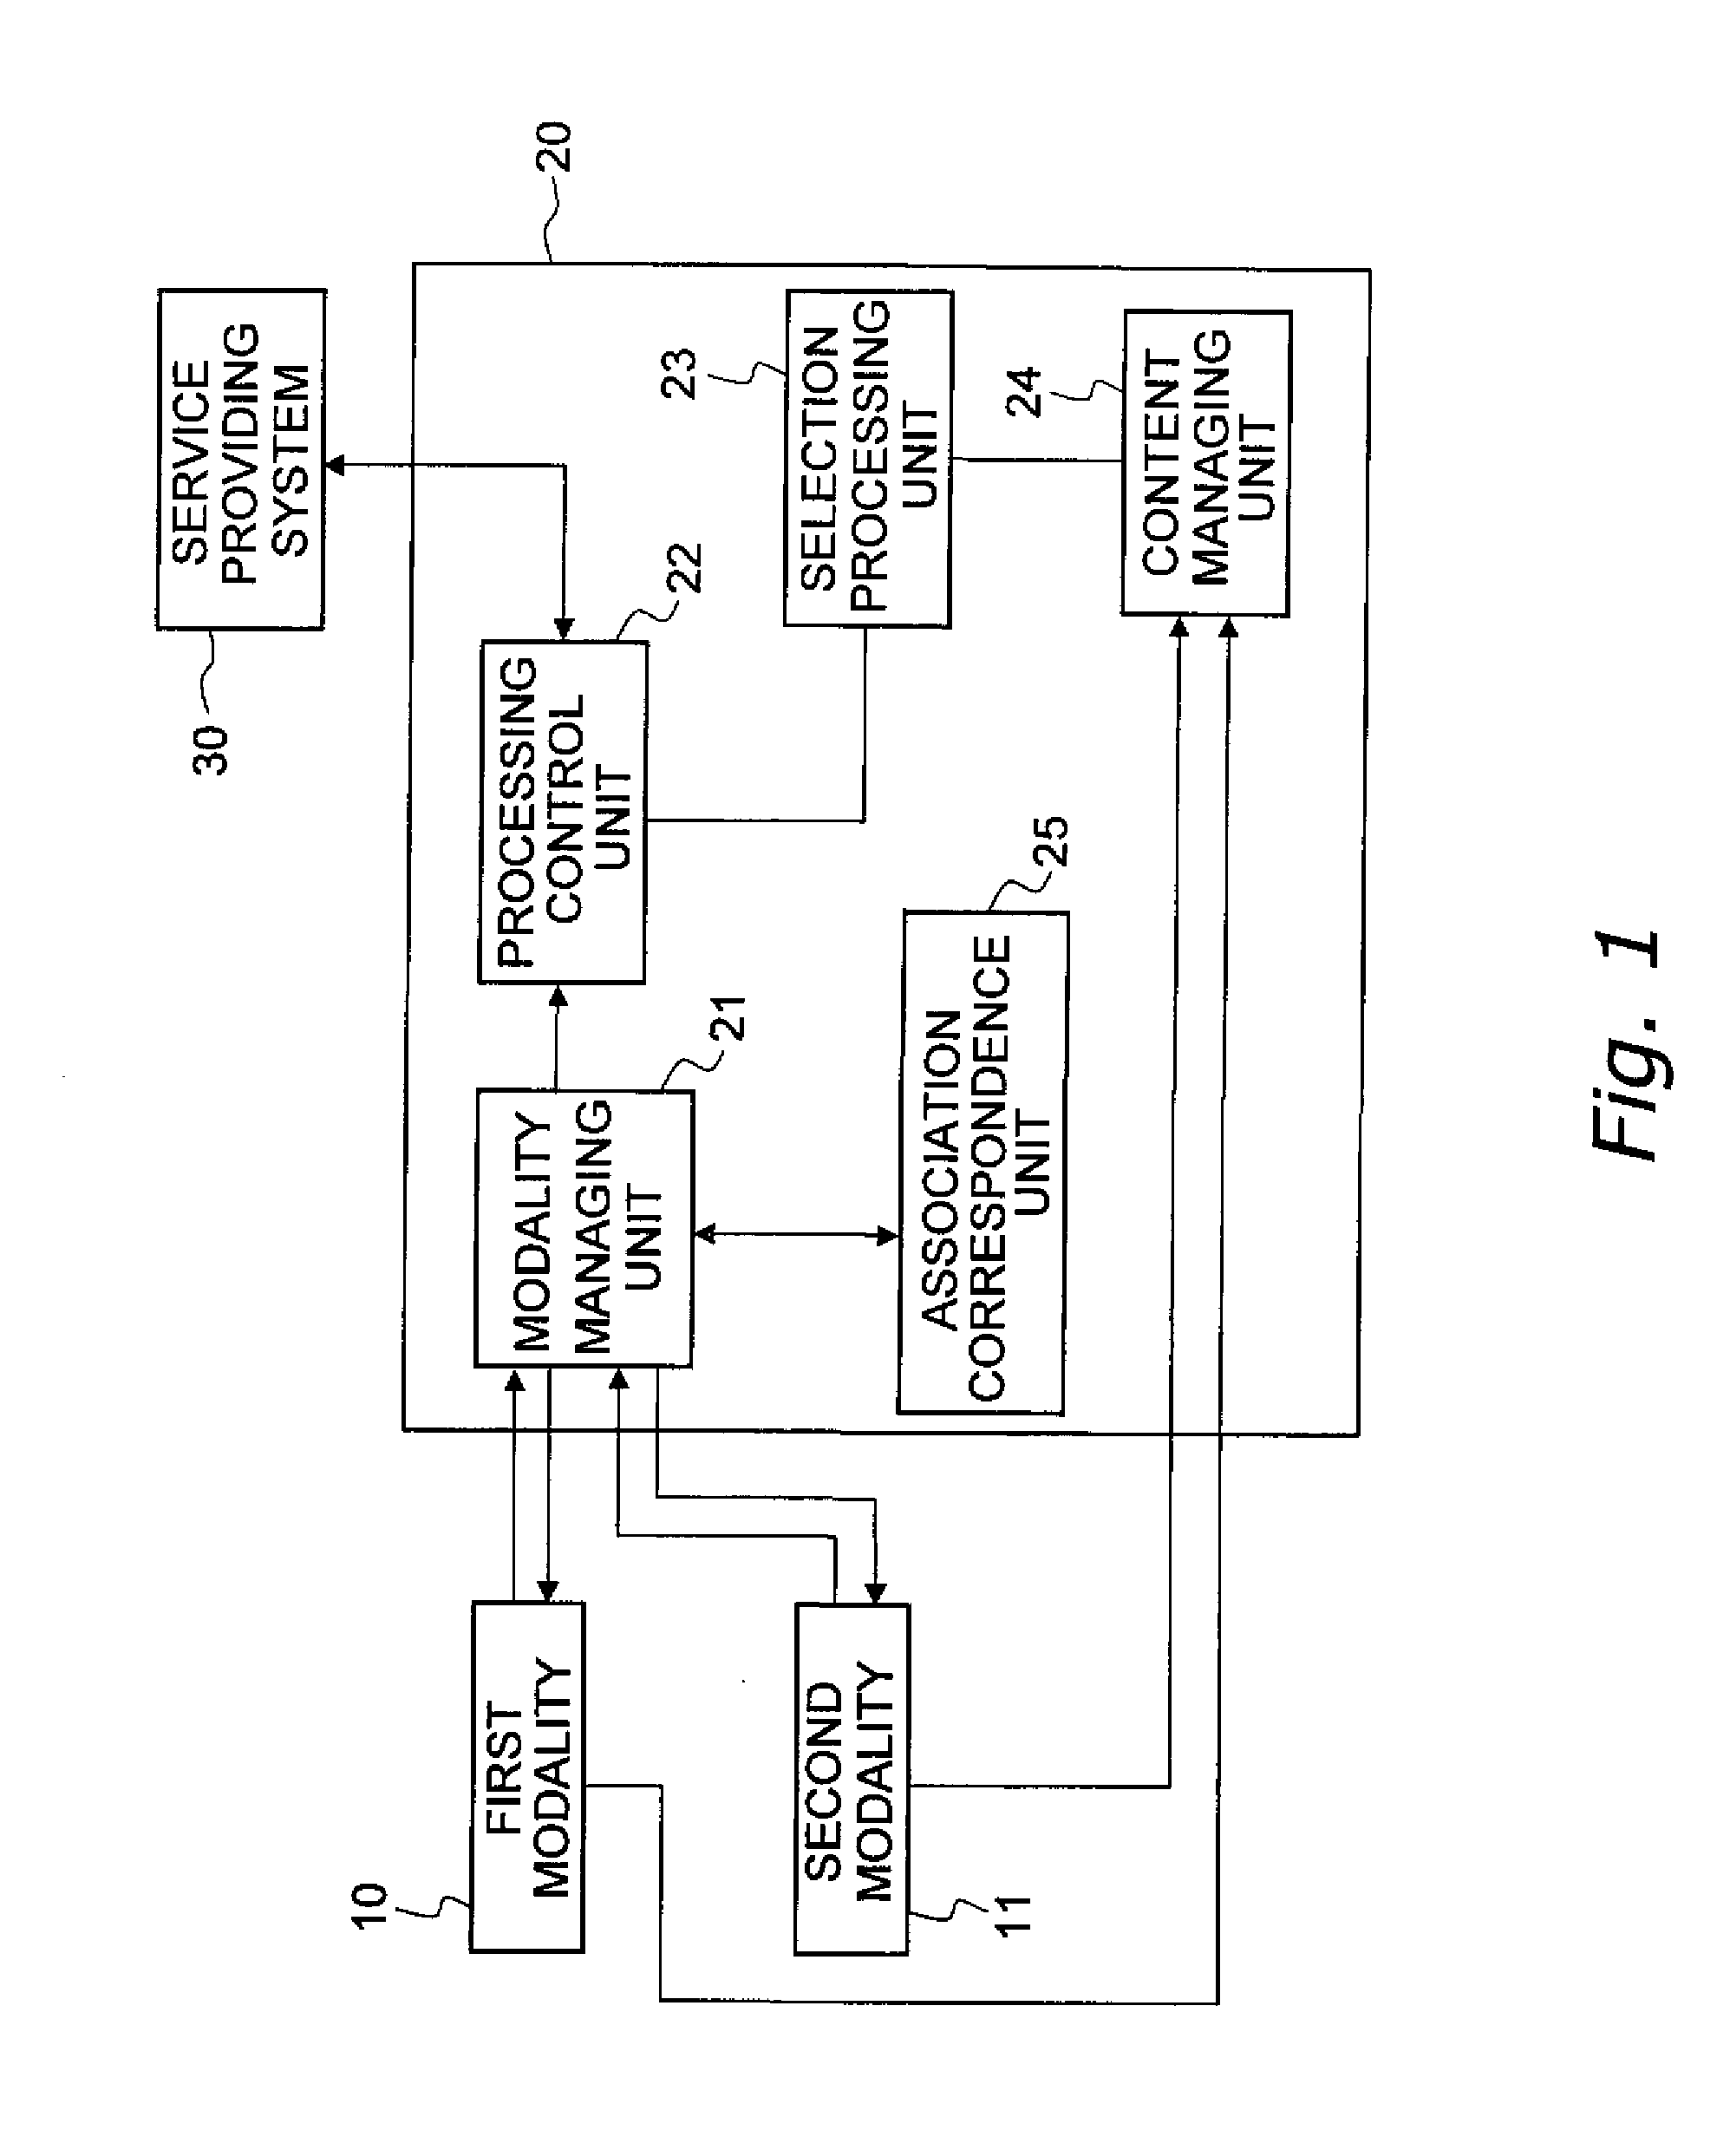 Method of associating multiple modalities and a multimodal system